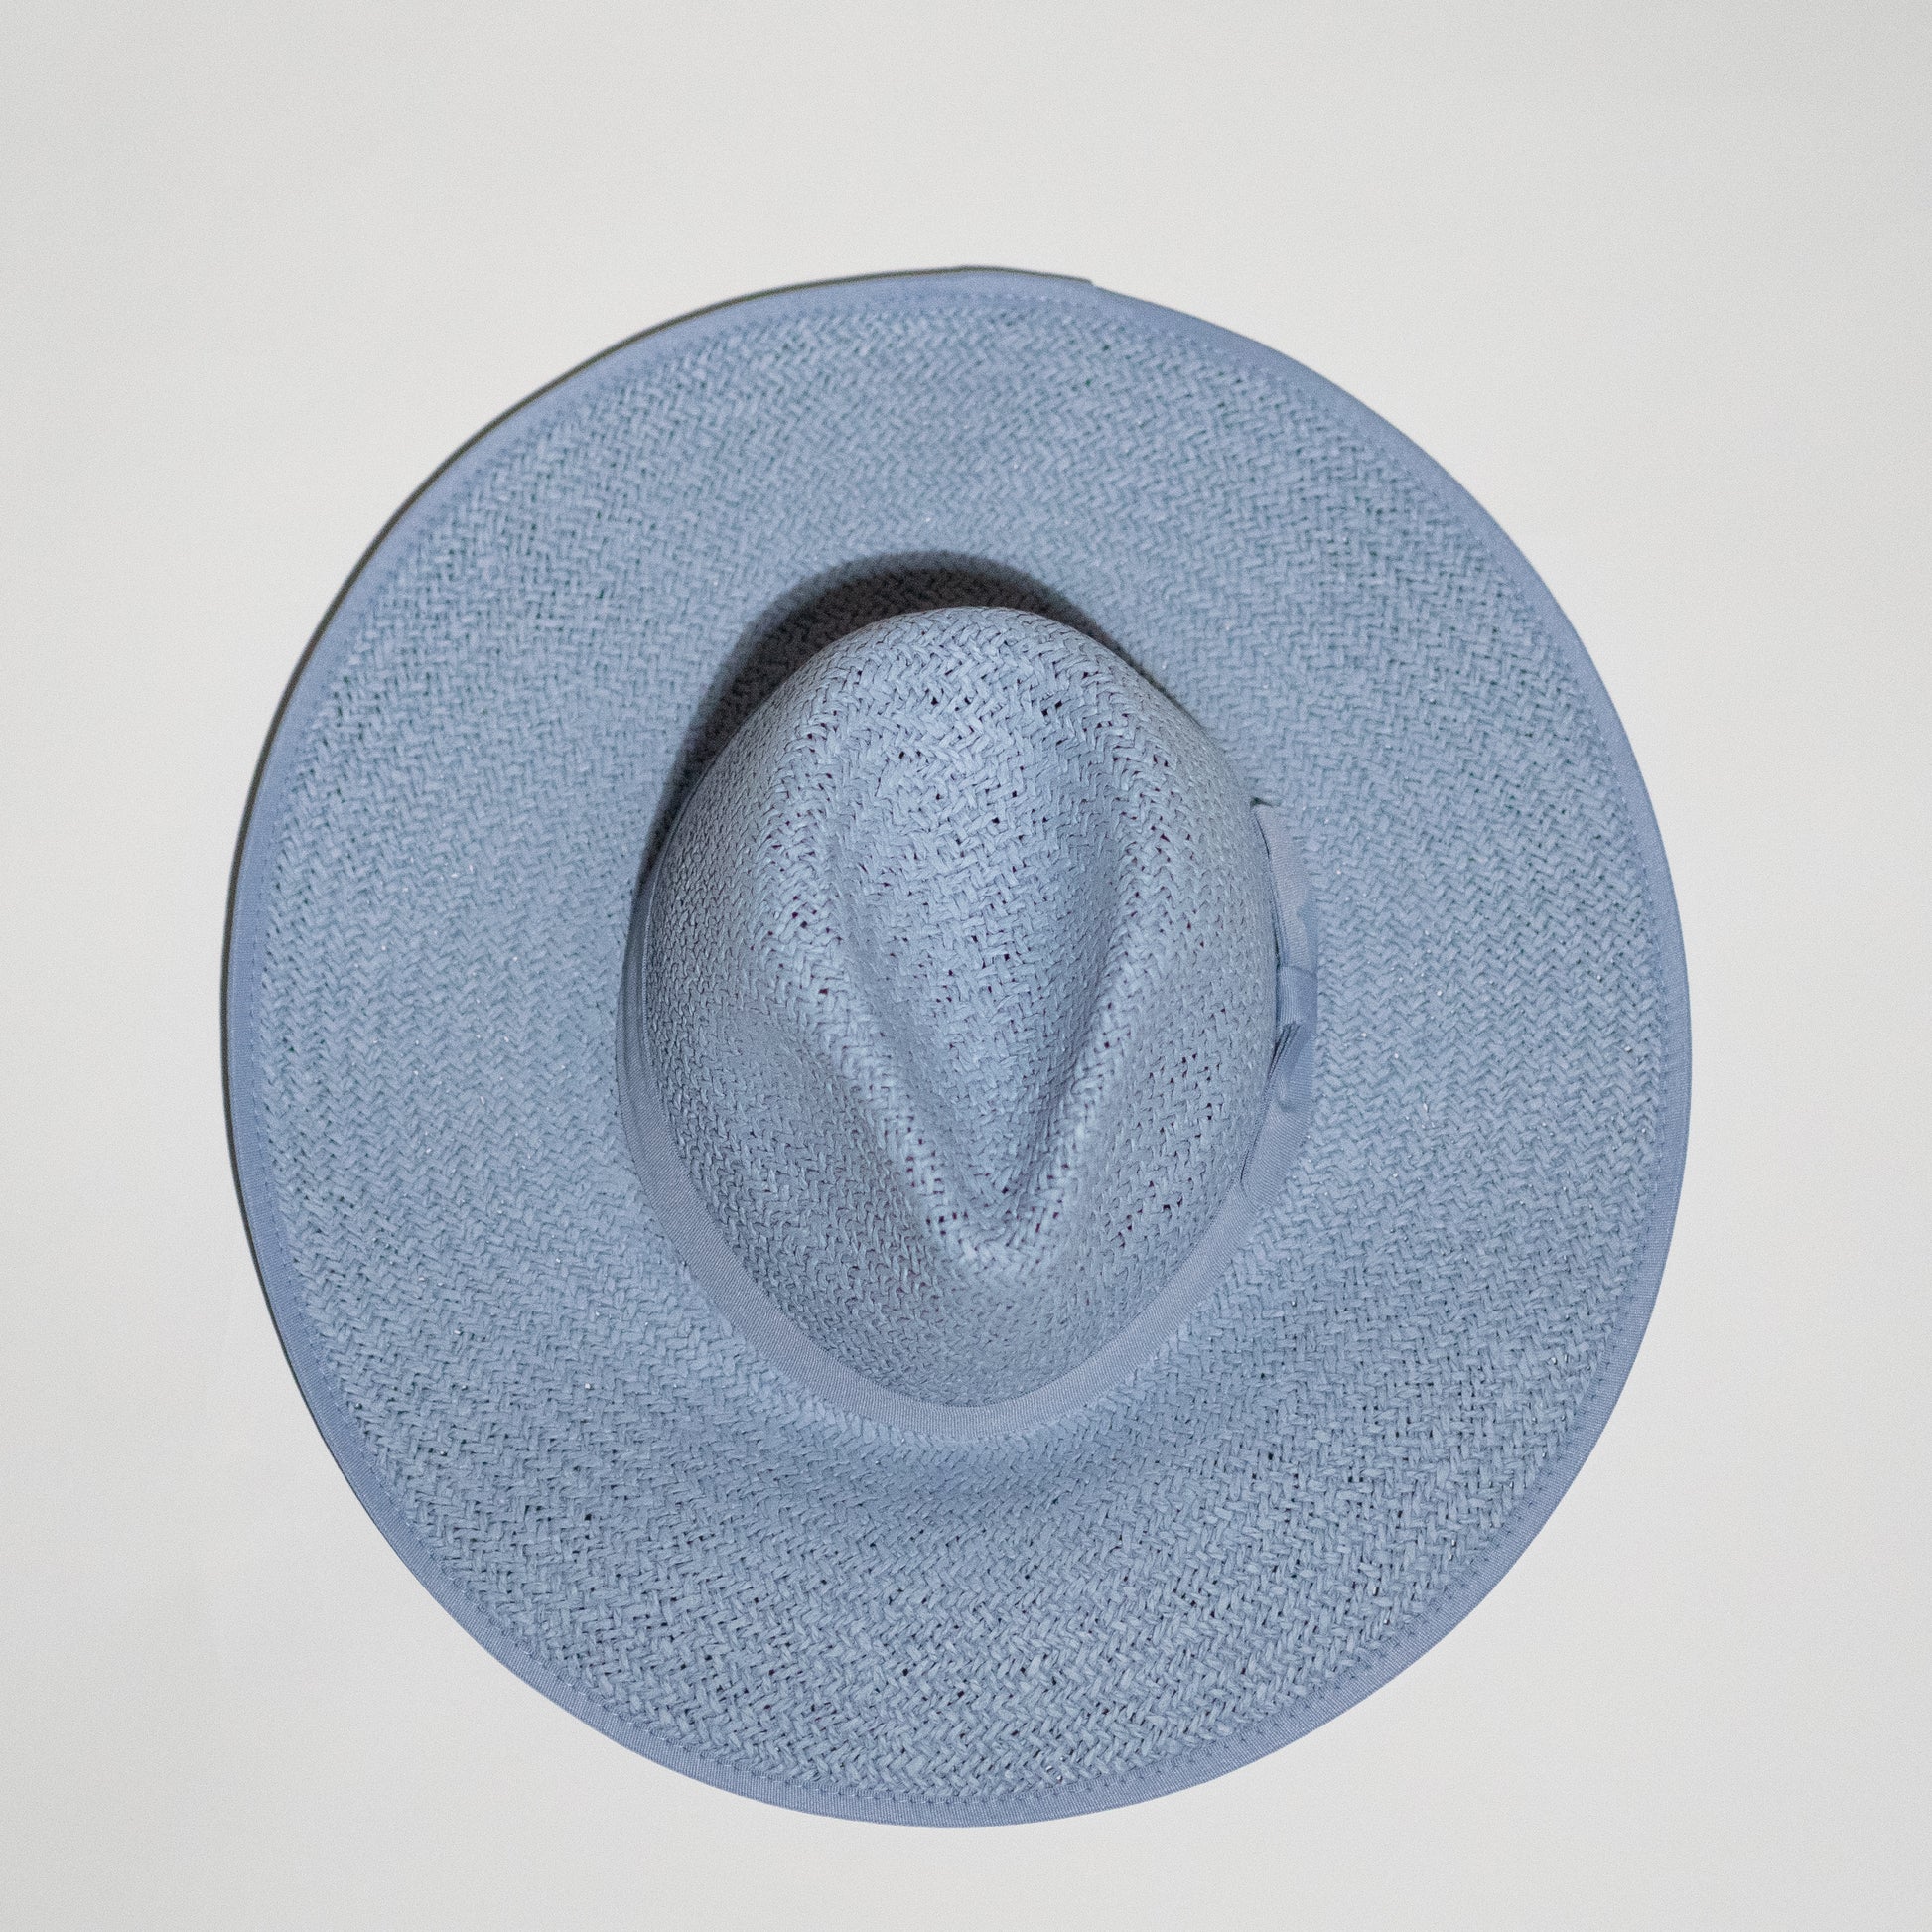 Wide Brim Straw Rancher Hats Powder Blue Circumference 16 inches Blaze and Sparkles